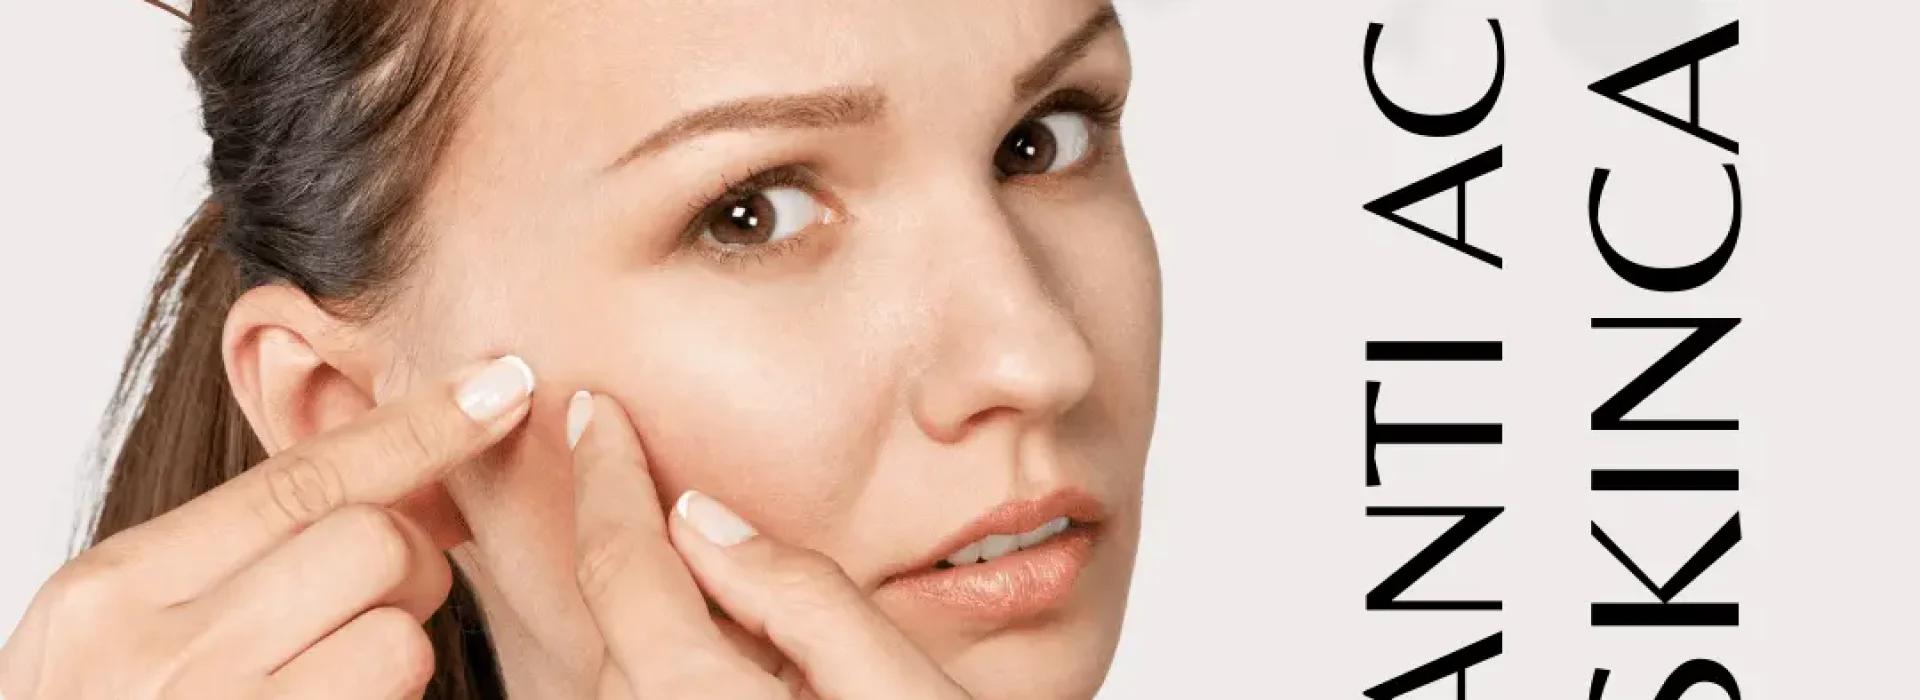 Acne - Causes and Types